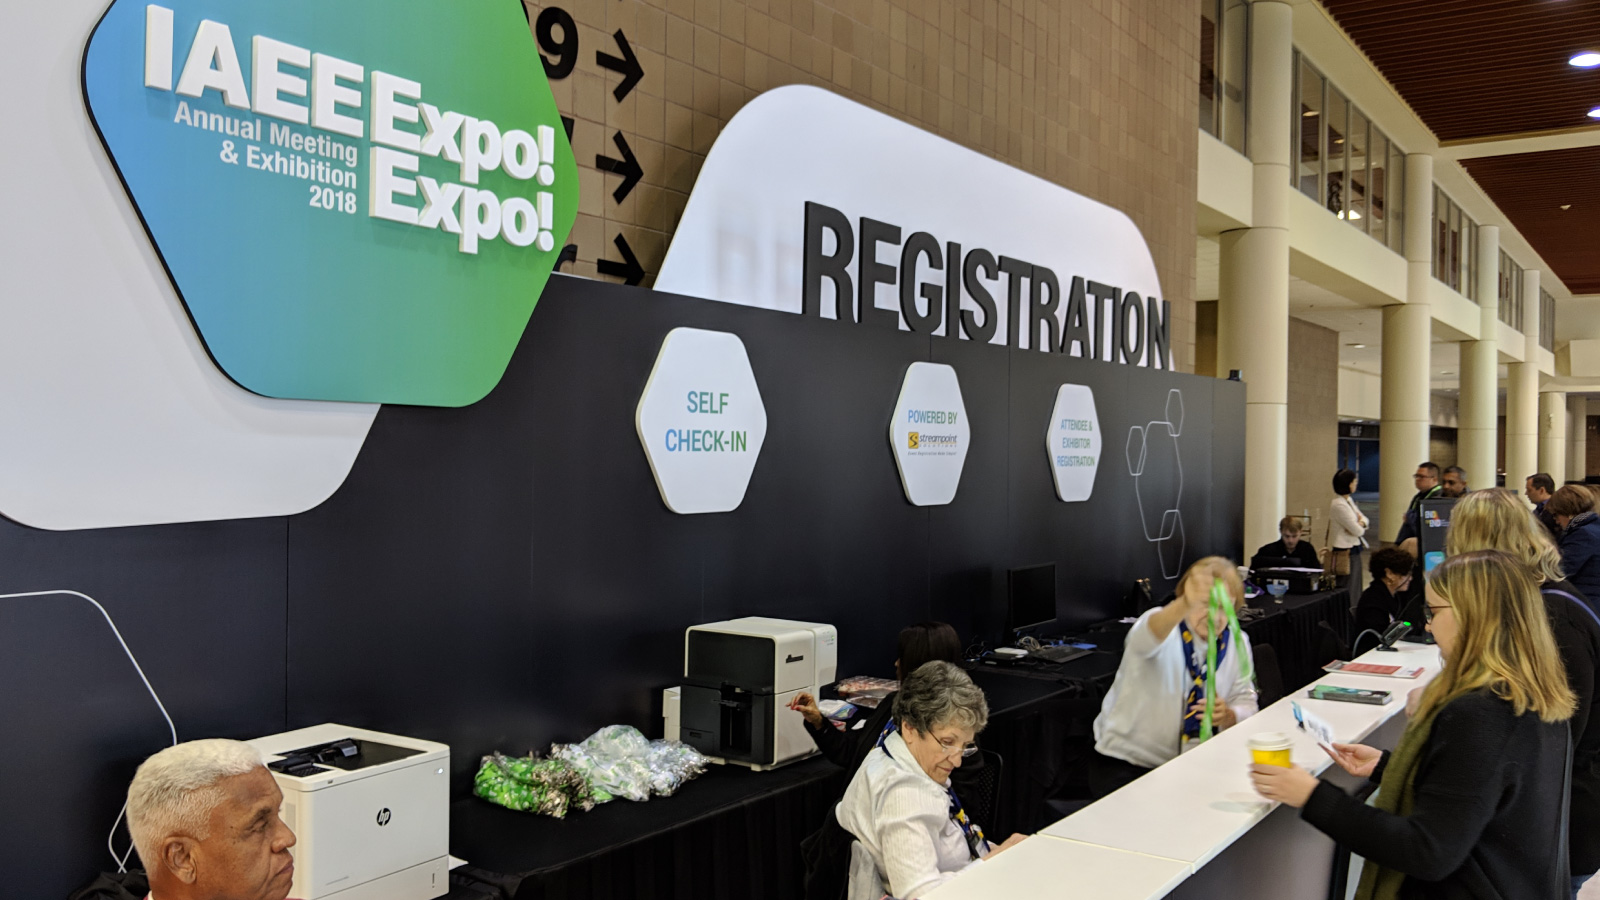 Photo of the IAEE Expo! Expo! registration booth with branded signage